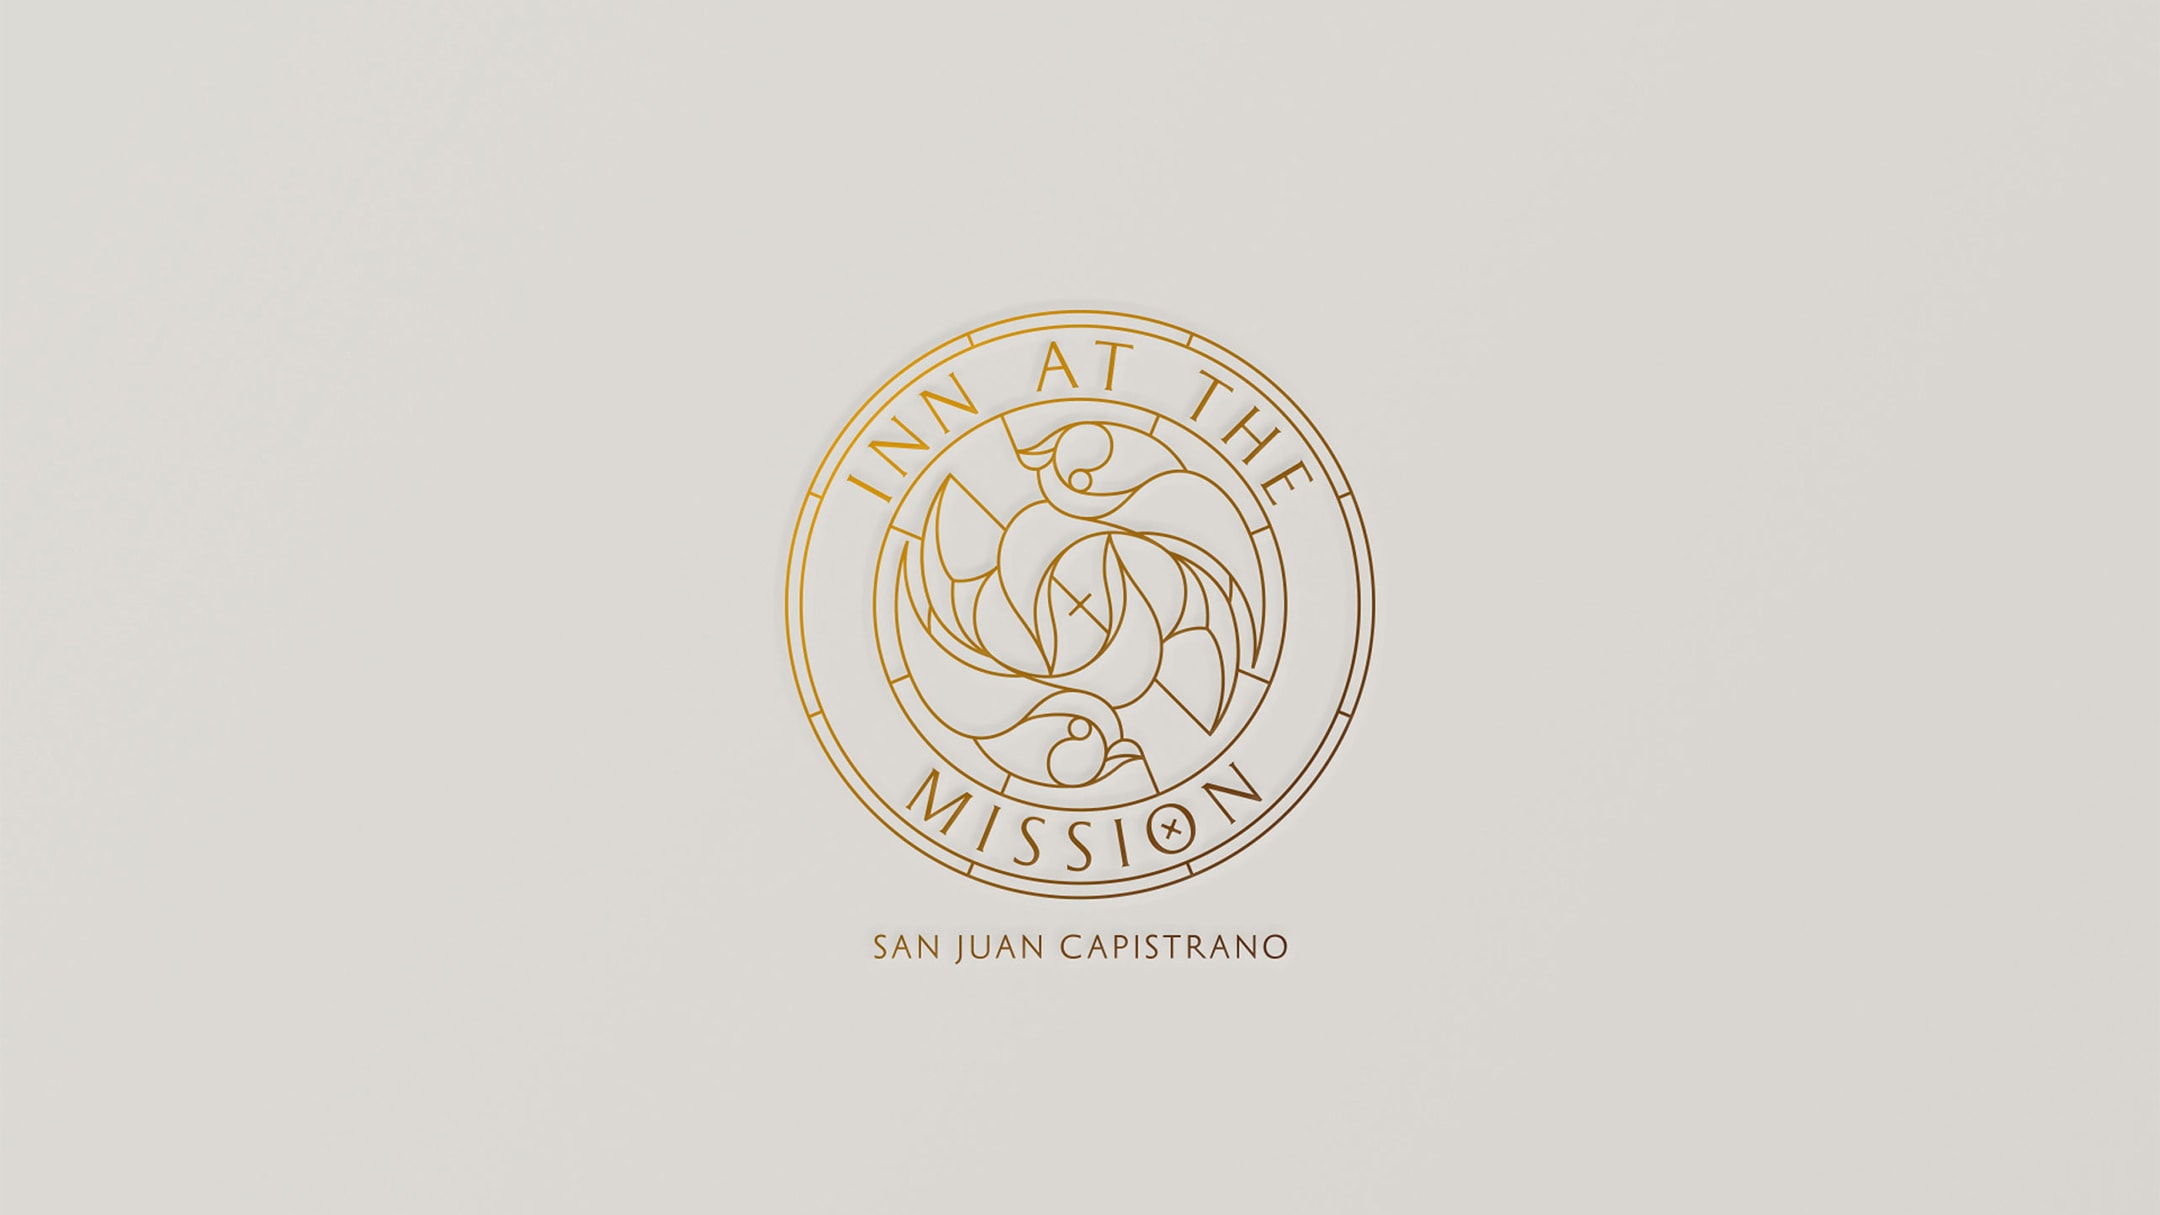 Inn At The Mission Logo to be used throughout the brand